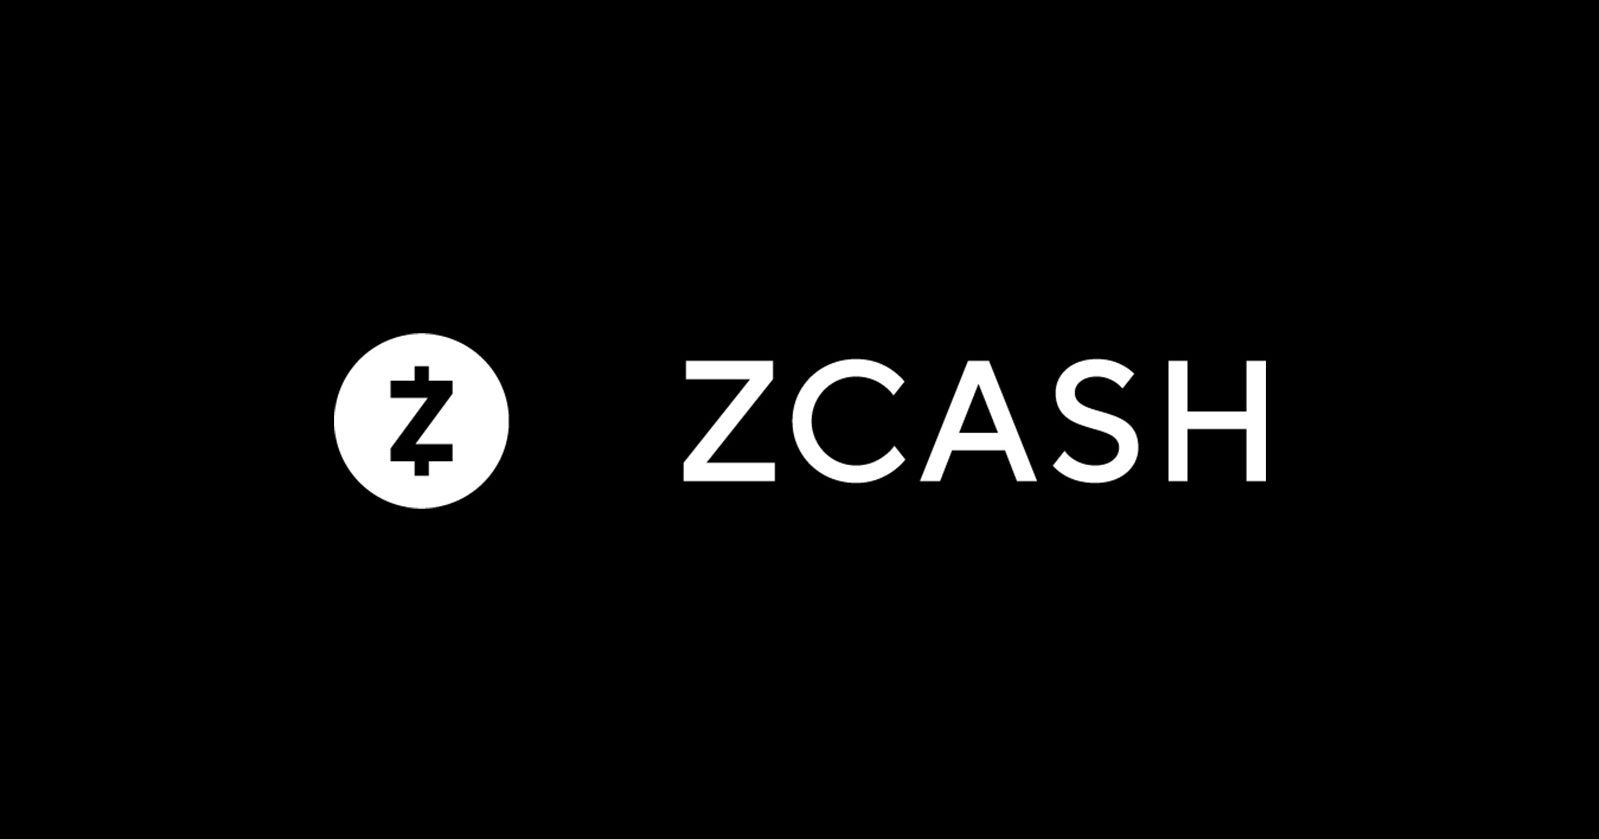 The best Zcash (ZEC) wallets for private transactions - Guide & review